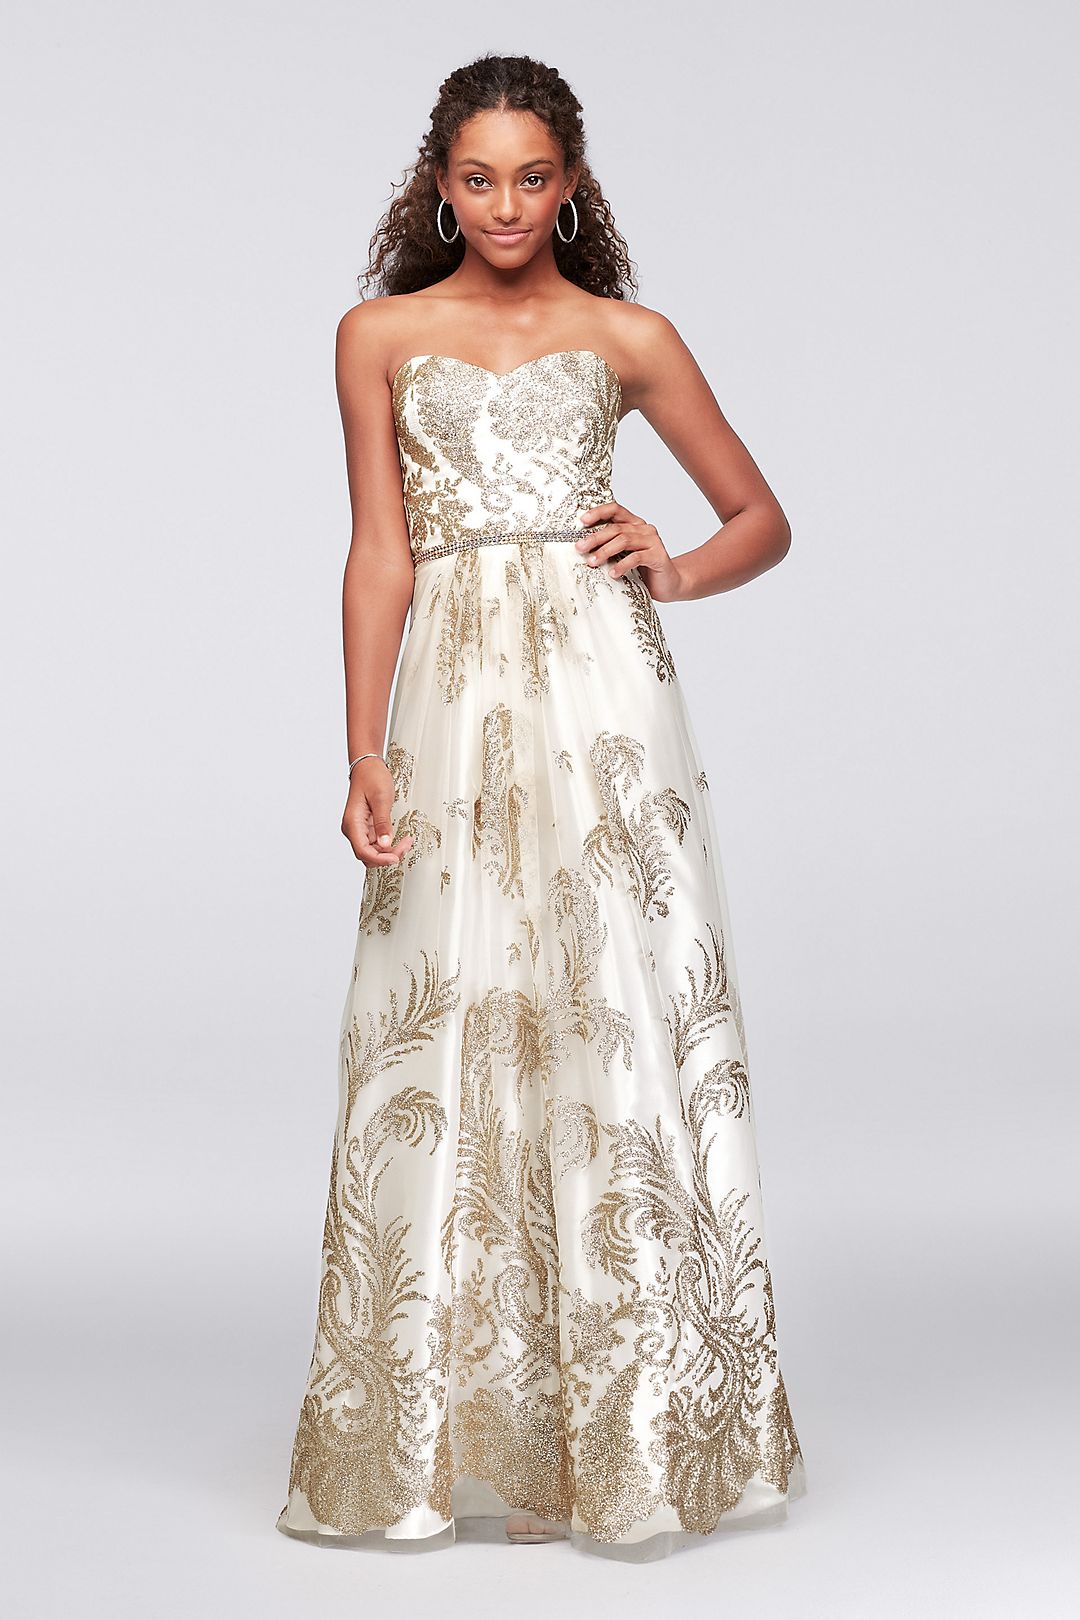 Strapless Glitter Brocade Gown with Crystal Belt Image